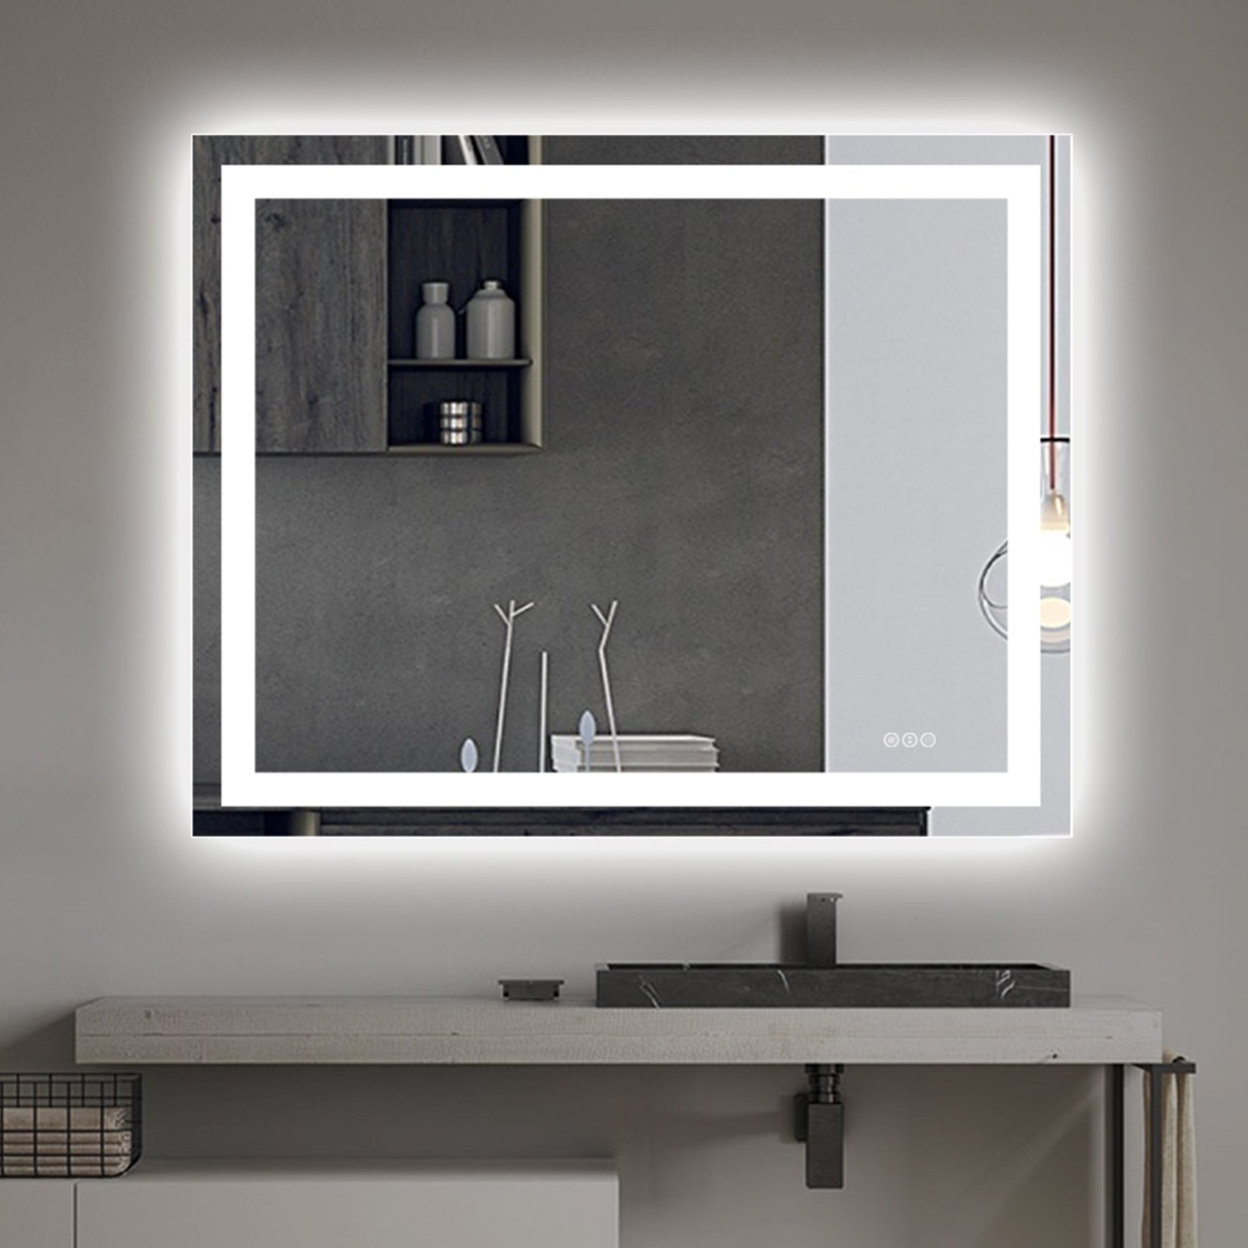 LED Bathroom Mirror,Anti Fog,Dimmable,Dual Lighting Mode,Tempered Glass - 20''x28''